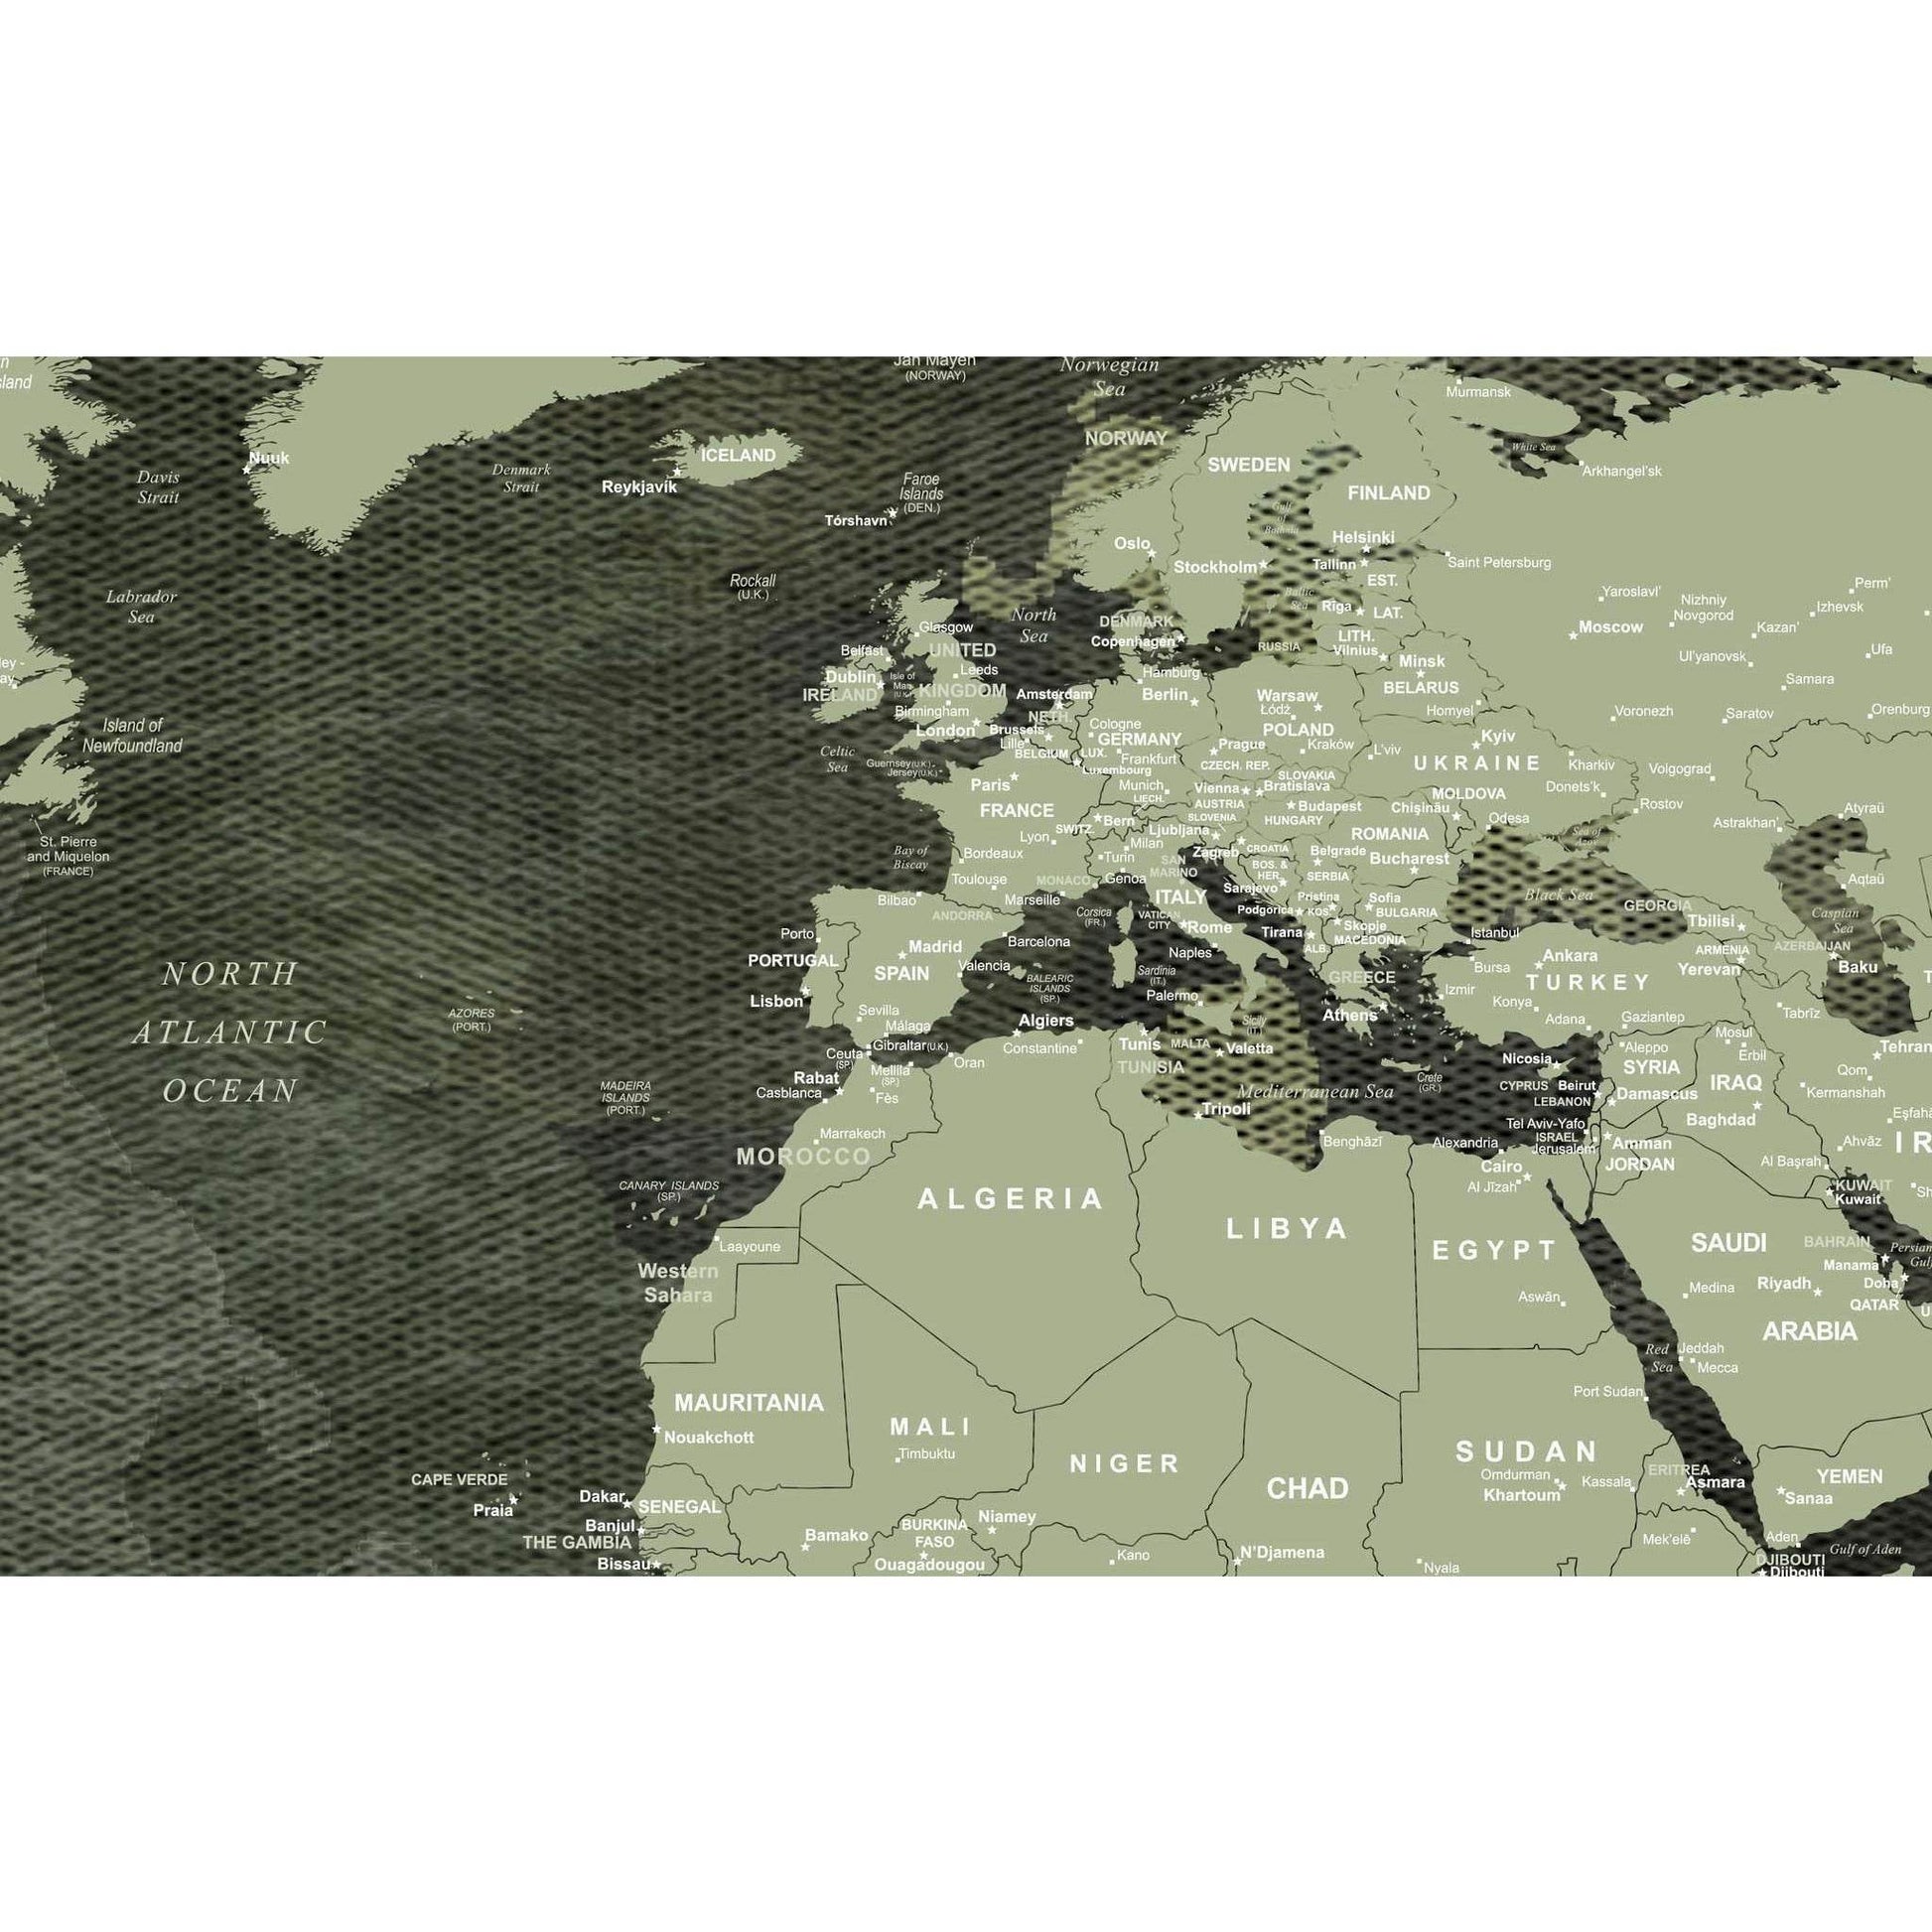 Military Themed World Map Canvas PrintDecorate your walls with a stunning Military World Map Canvas Art Print from the world's largest art gallery. Choose from thousands of World Map artworks with various sizing options. Choose your perfect art print to c